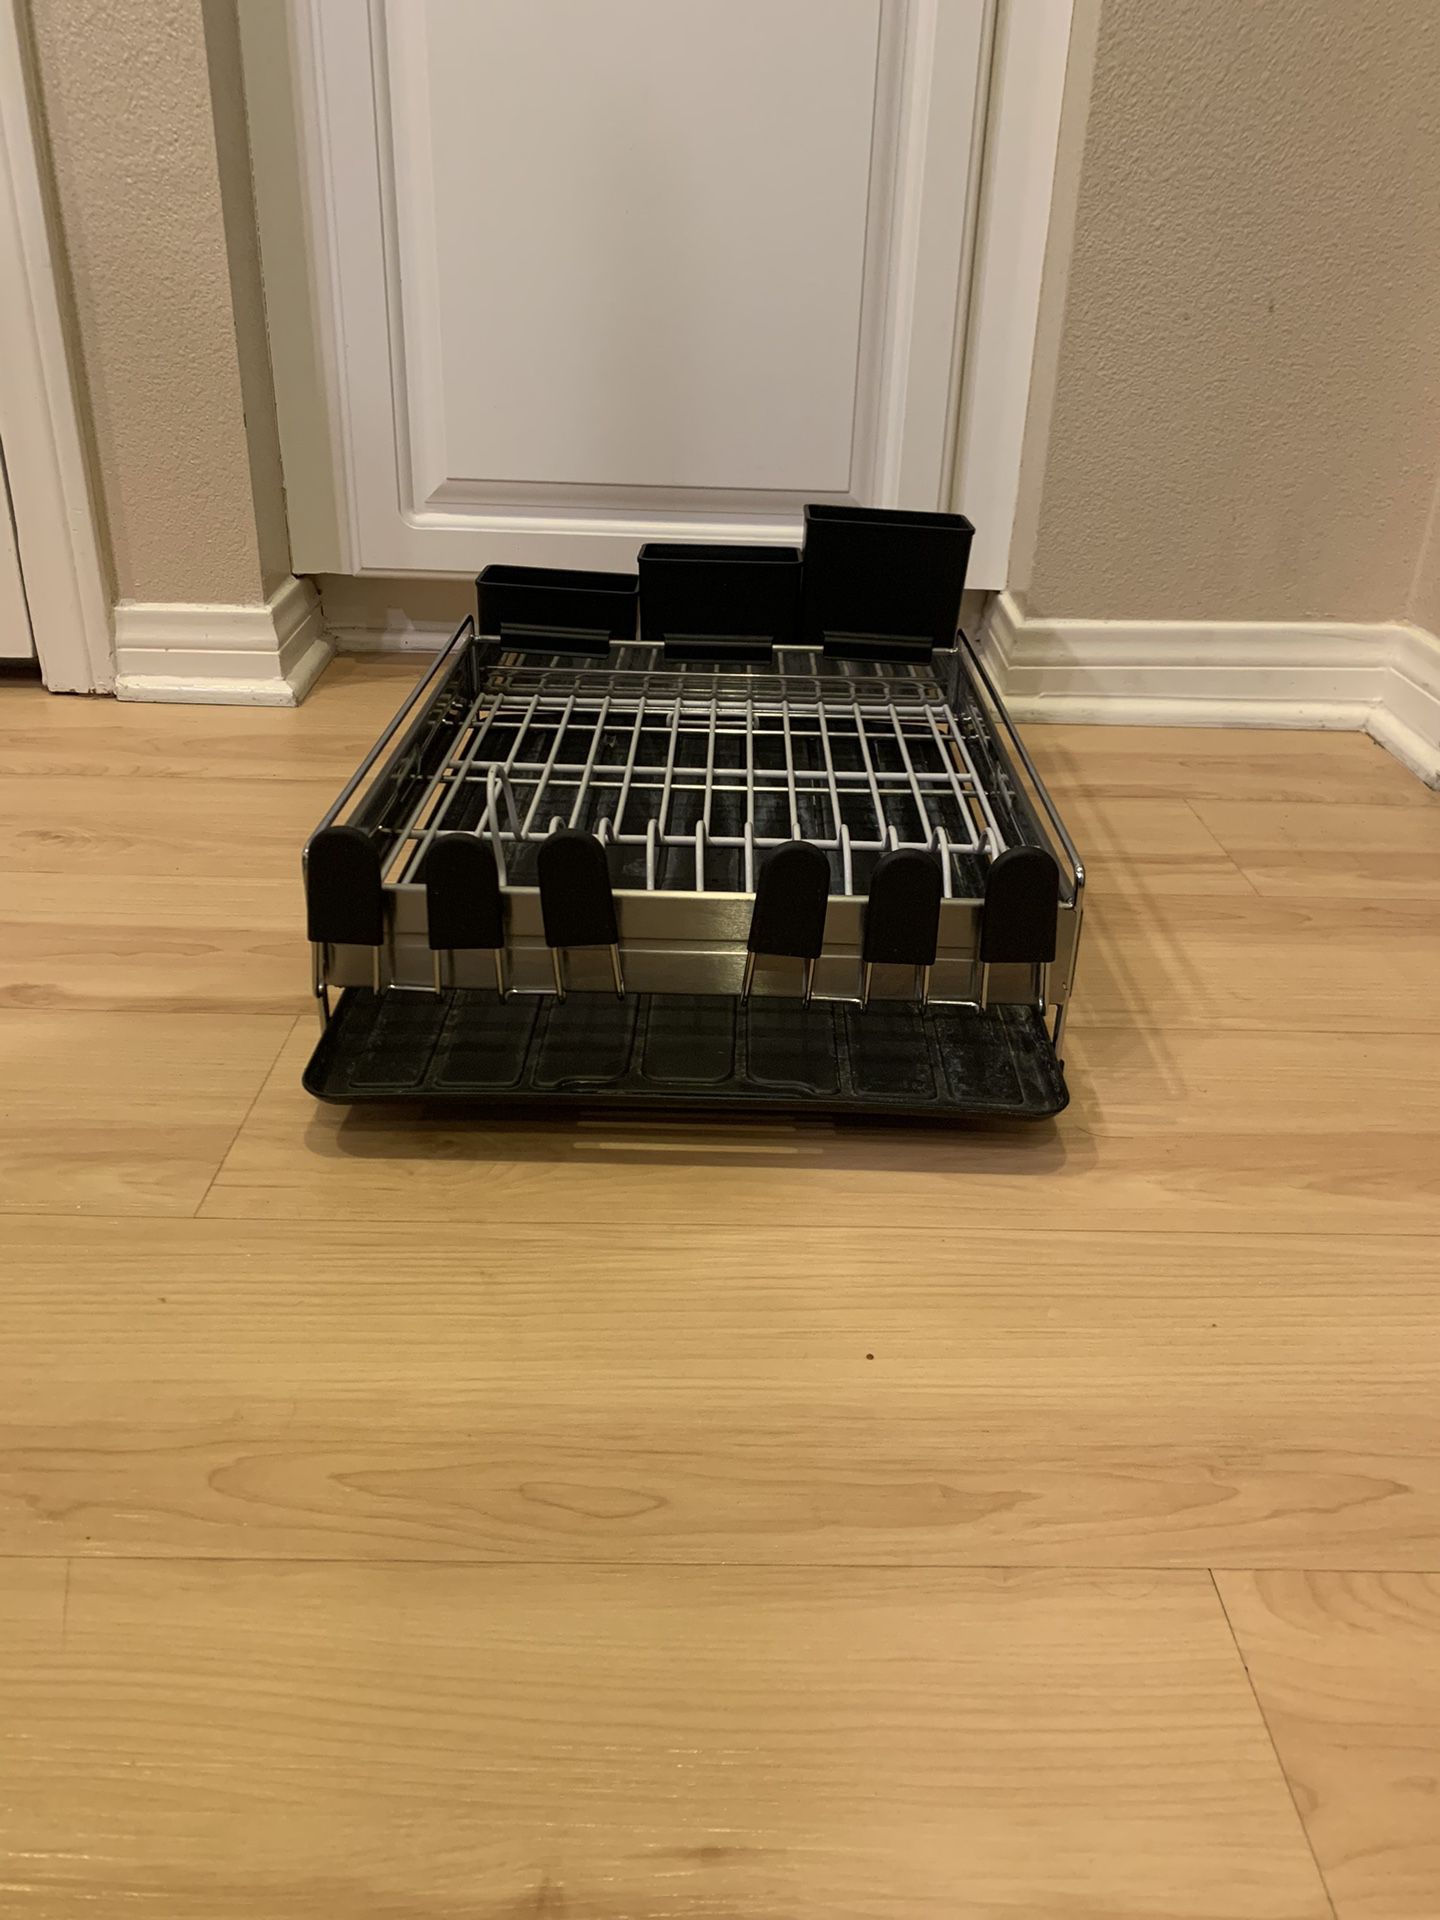 Sabatier Expandable Dish Rack XL for Sale in Sugar Hill, GA - OfferUp